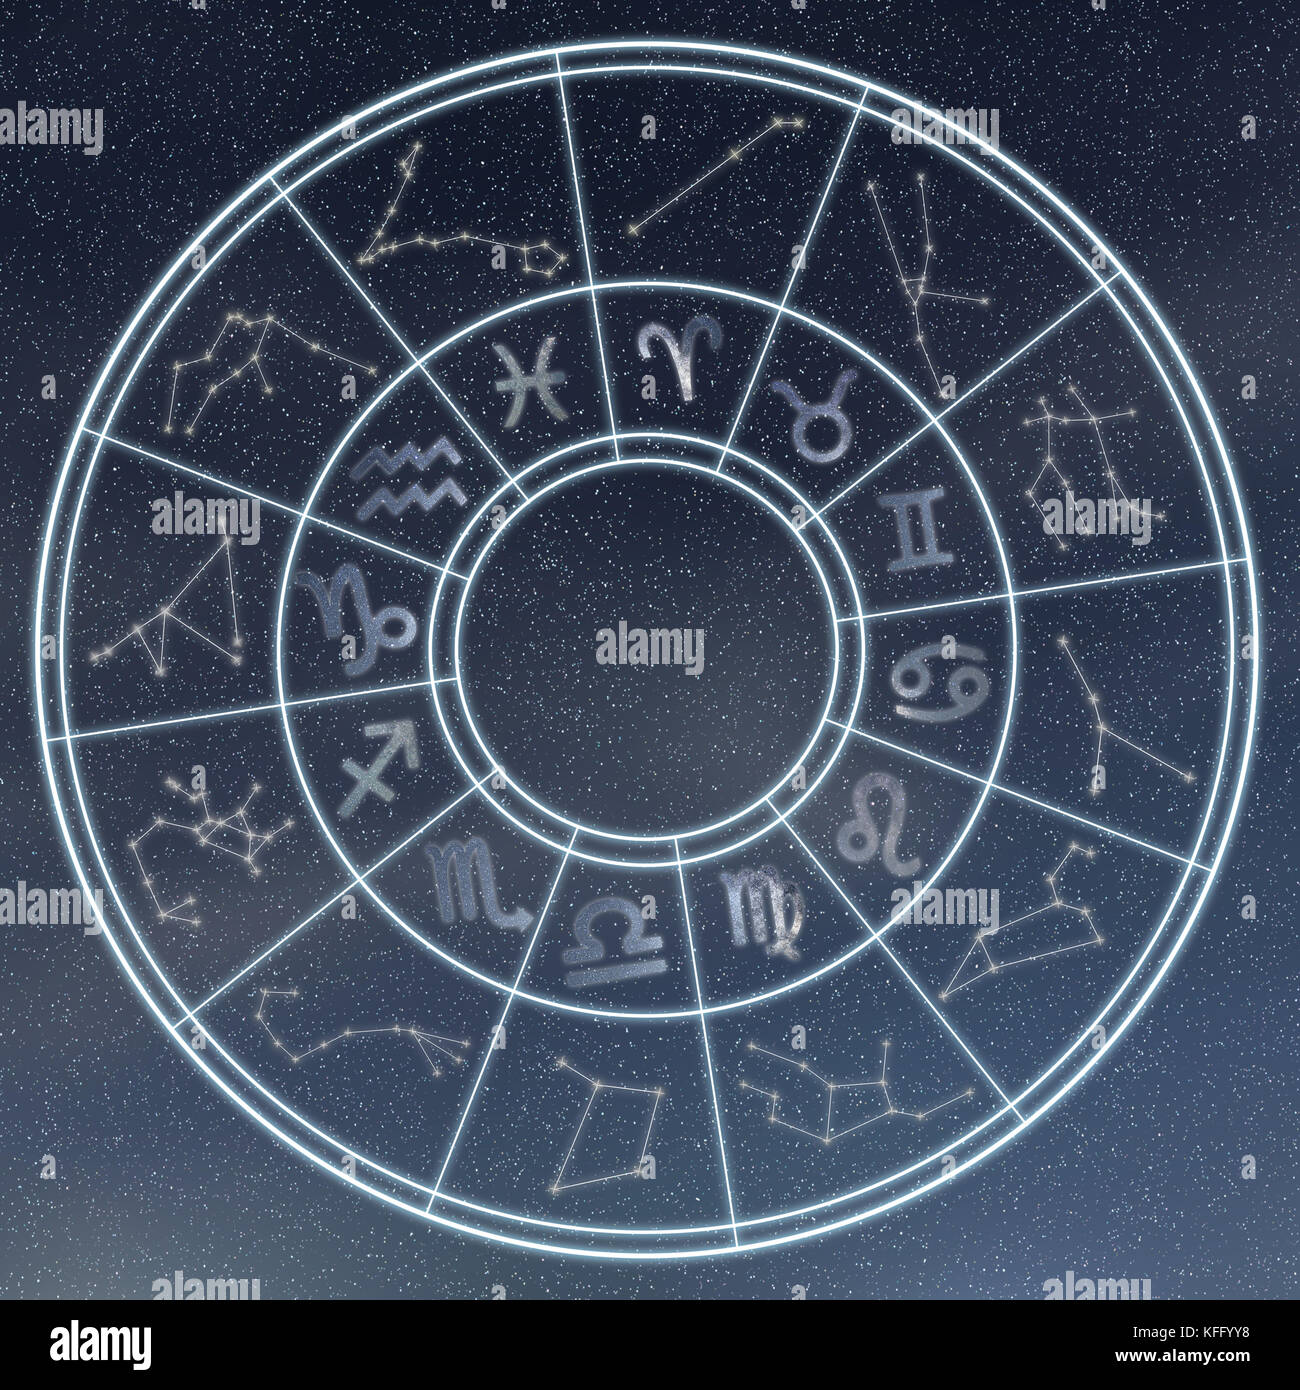 Astrology and horoscopes concept. Astrological zodiac signs in circle on starry background. Stock Photo